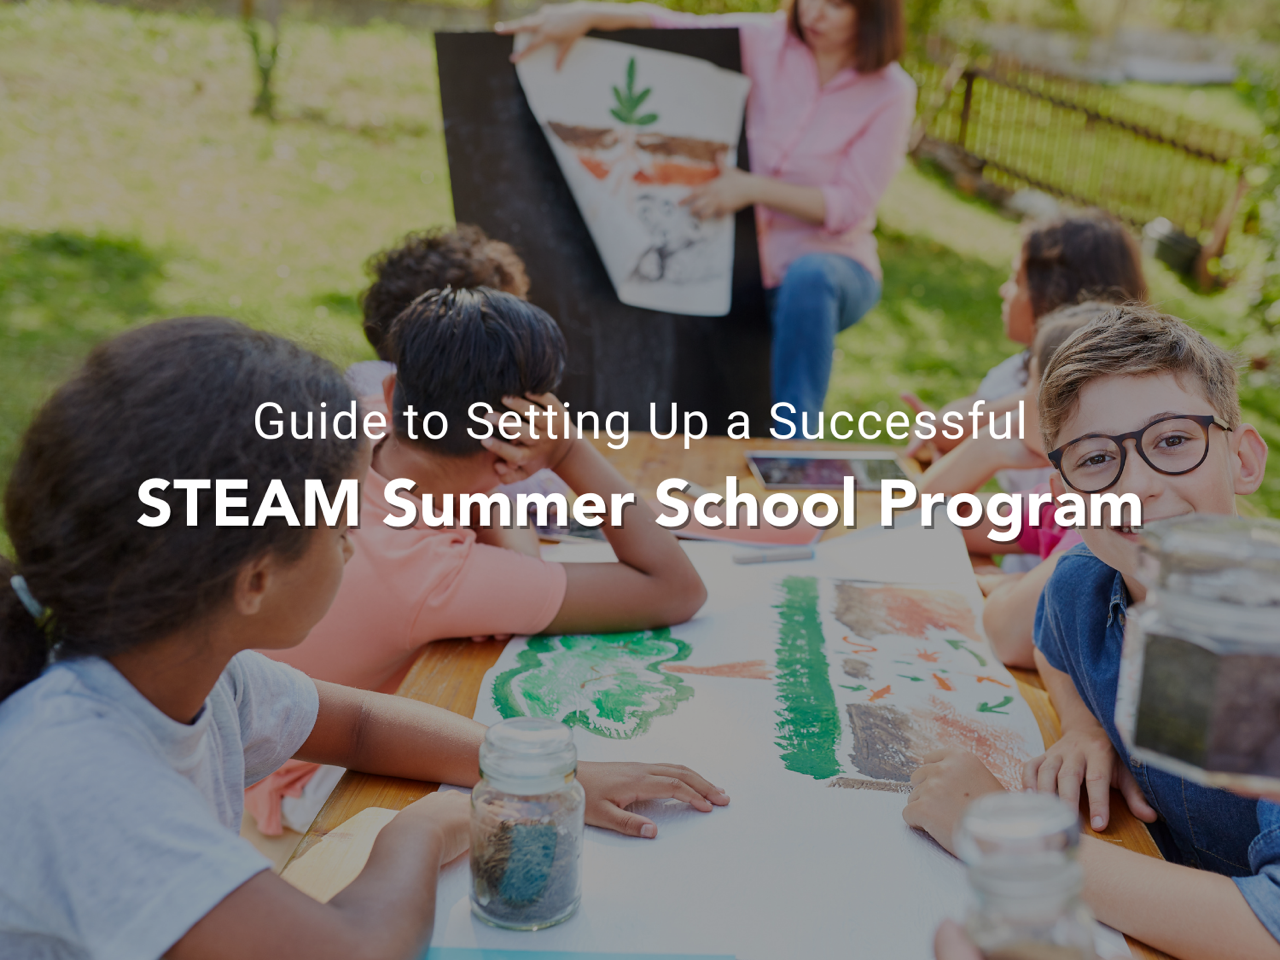 In this article, we’ll explore ways to create summer enrichment opportunities through a STEAM summer learning program. 